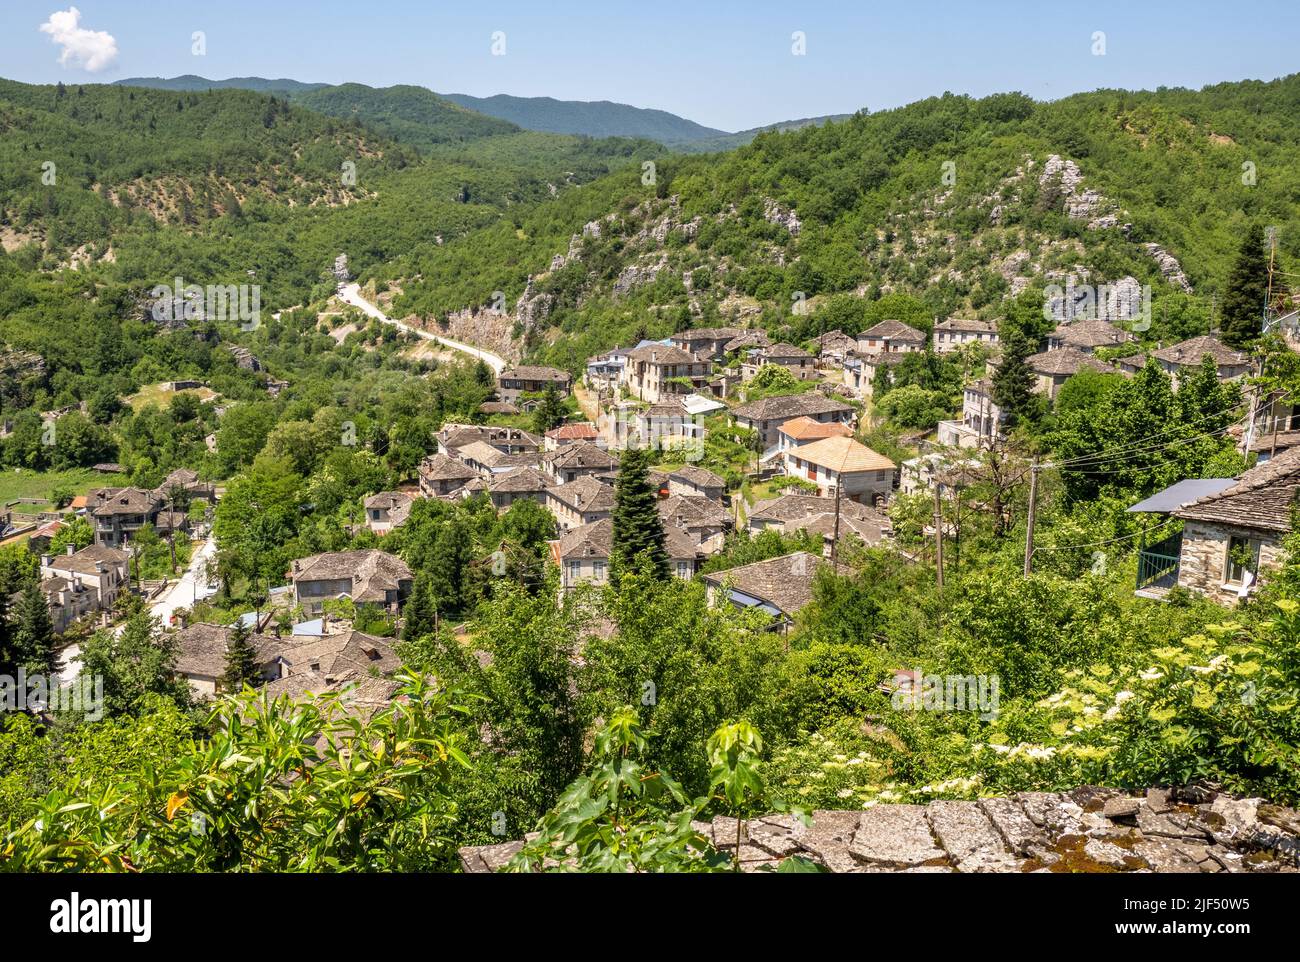 The mountain village of Kipi in the upper reaches of the Vikos Gorge in Zagori northern Greece Stock Photo